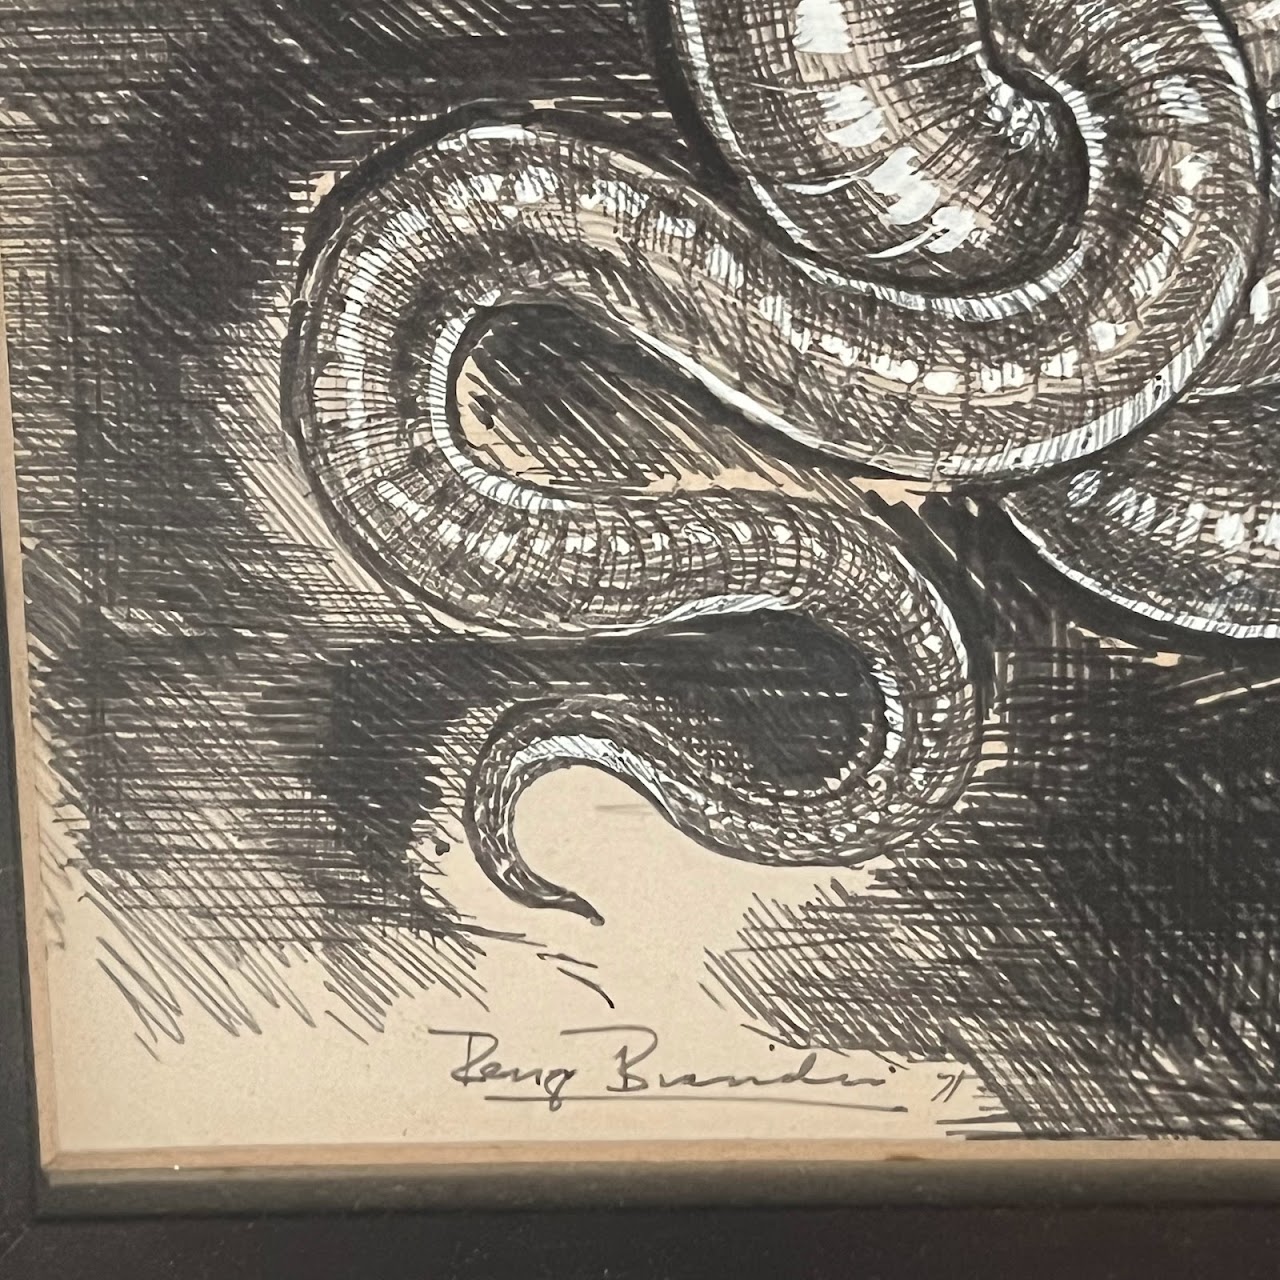 1970s Serpent Deity Signed Ink and Gouache Drawing